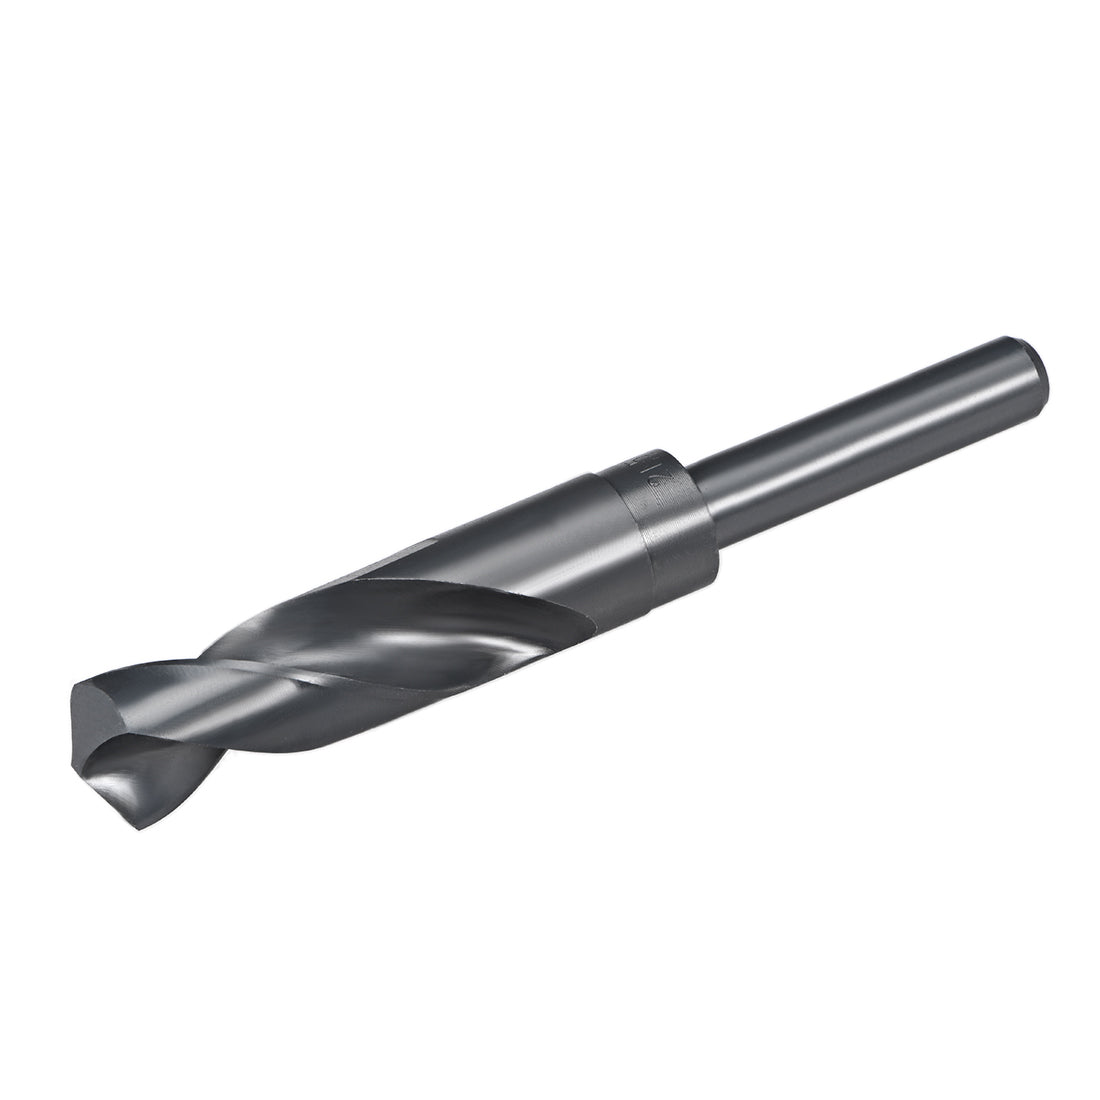 uxcell Uxcell Reduced Shank Drill Bit 21.5mm HSS 6542 Black Oxide with 1/2 Inch Straight Shank